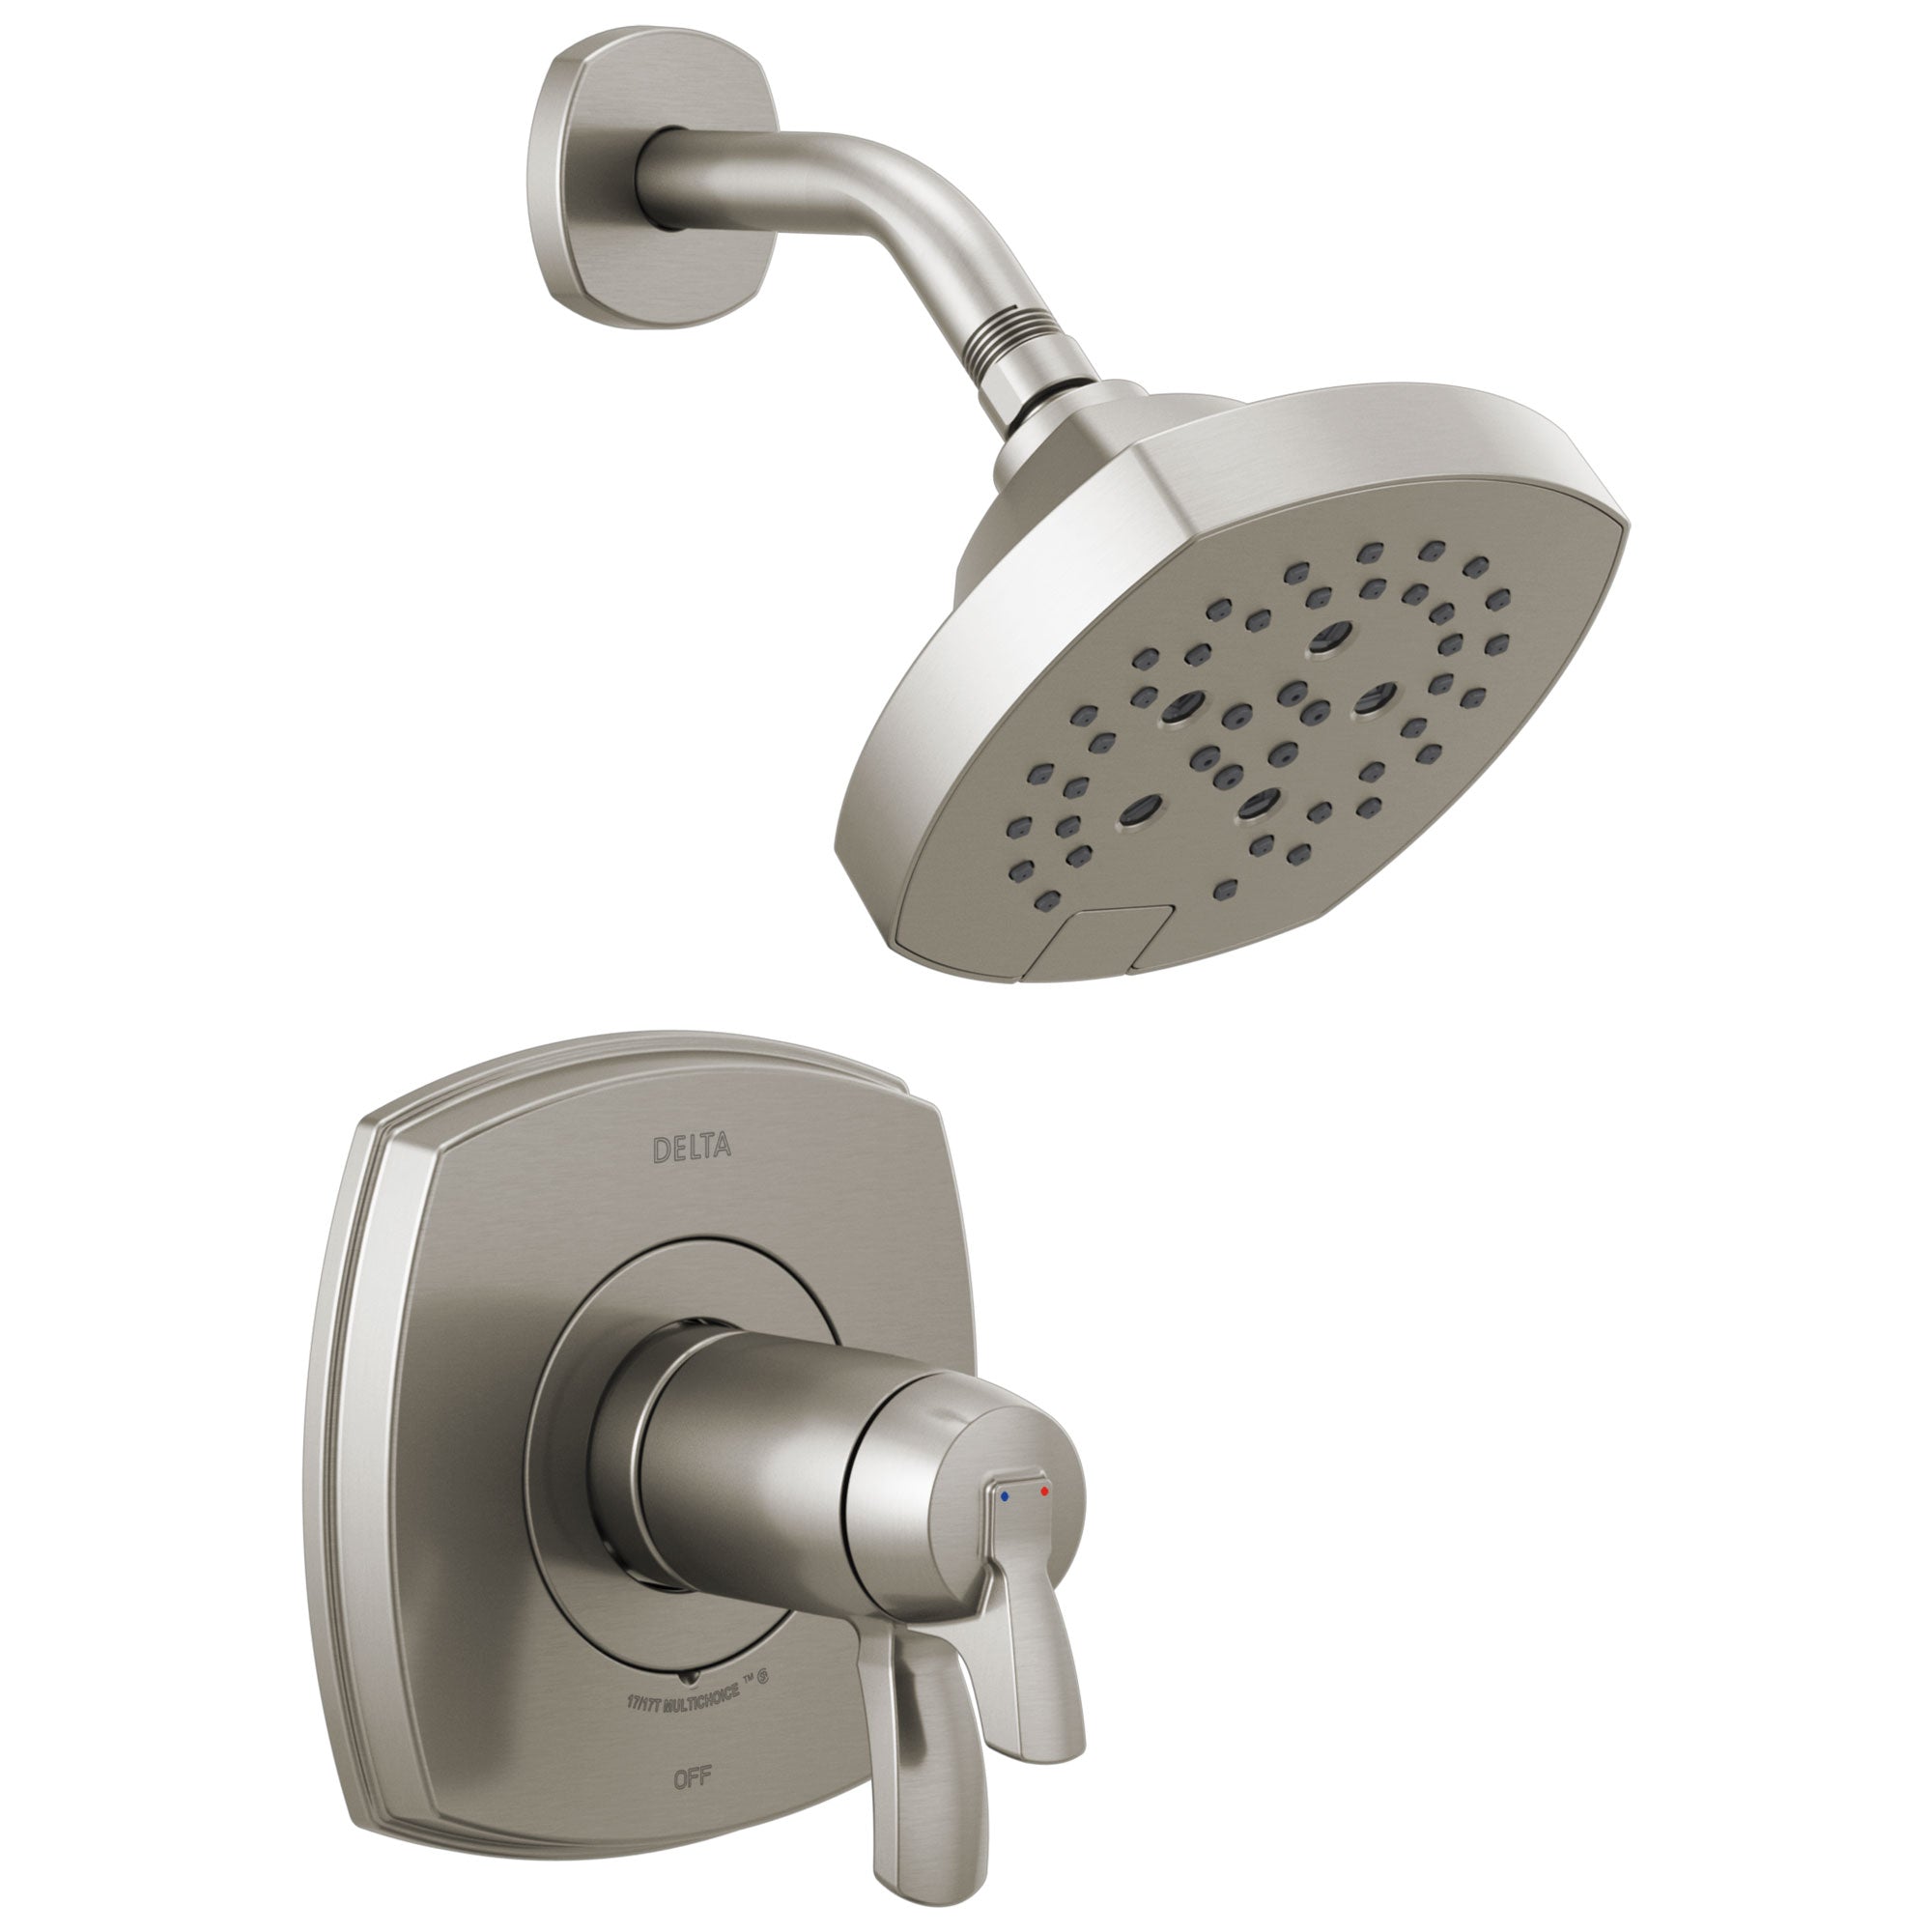 Delta Stryke Stainless Steel Finish 17T Thermostatic Shower Only Faucet Includes Cartridge, Handles, and Rough-in Valve without Stops D3277V